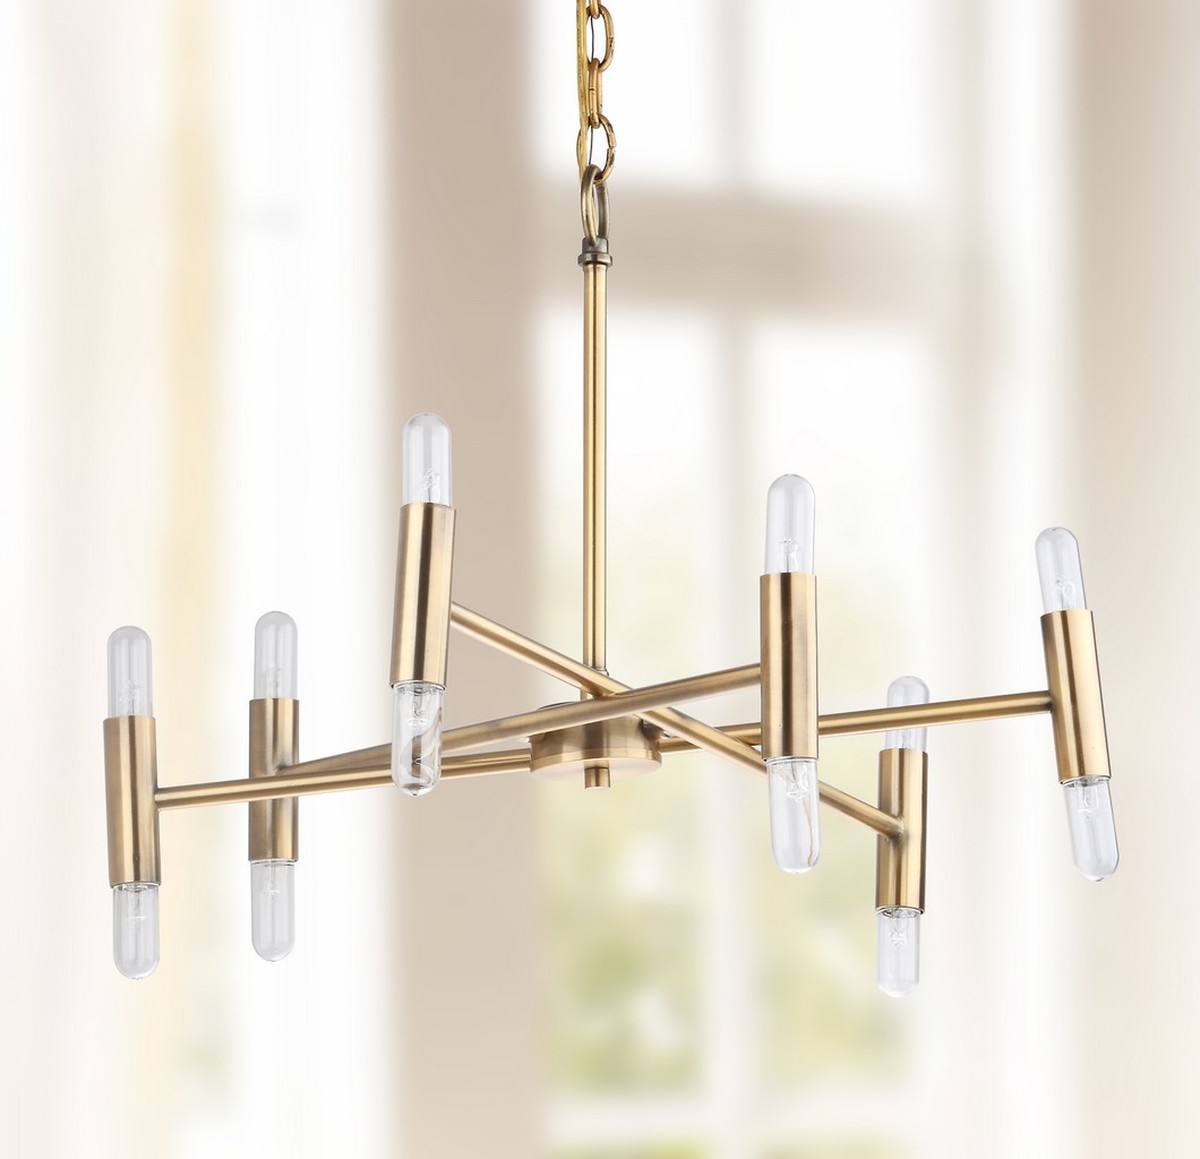 Gale Chandelier - Gold - Arlo Home - Image 1